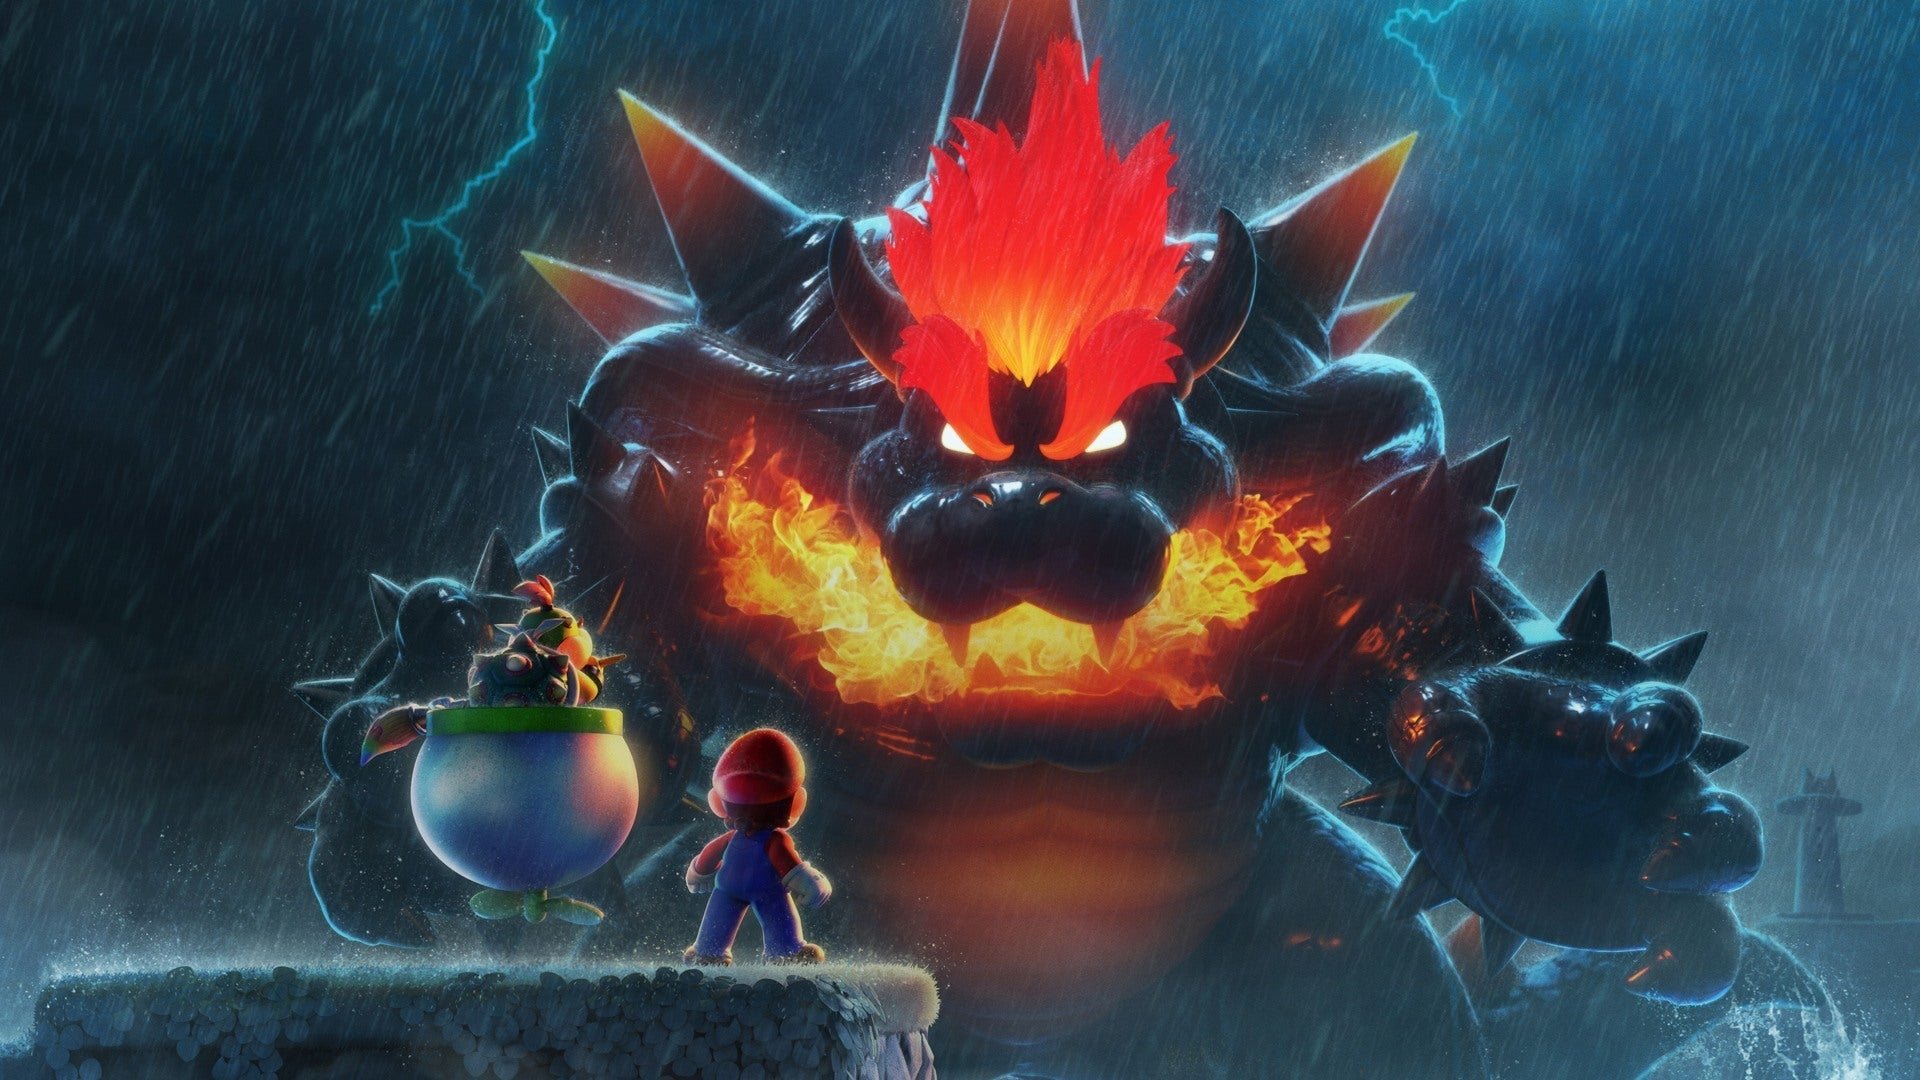 The awesome Bowser's Fury artwork in the highest resolution I could find for a wallpaper!